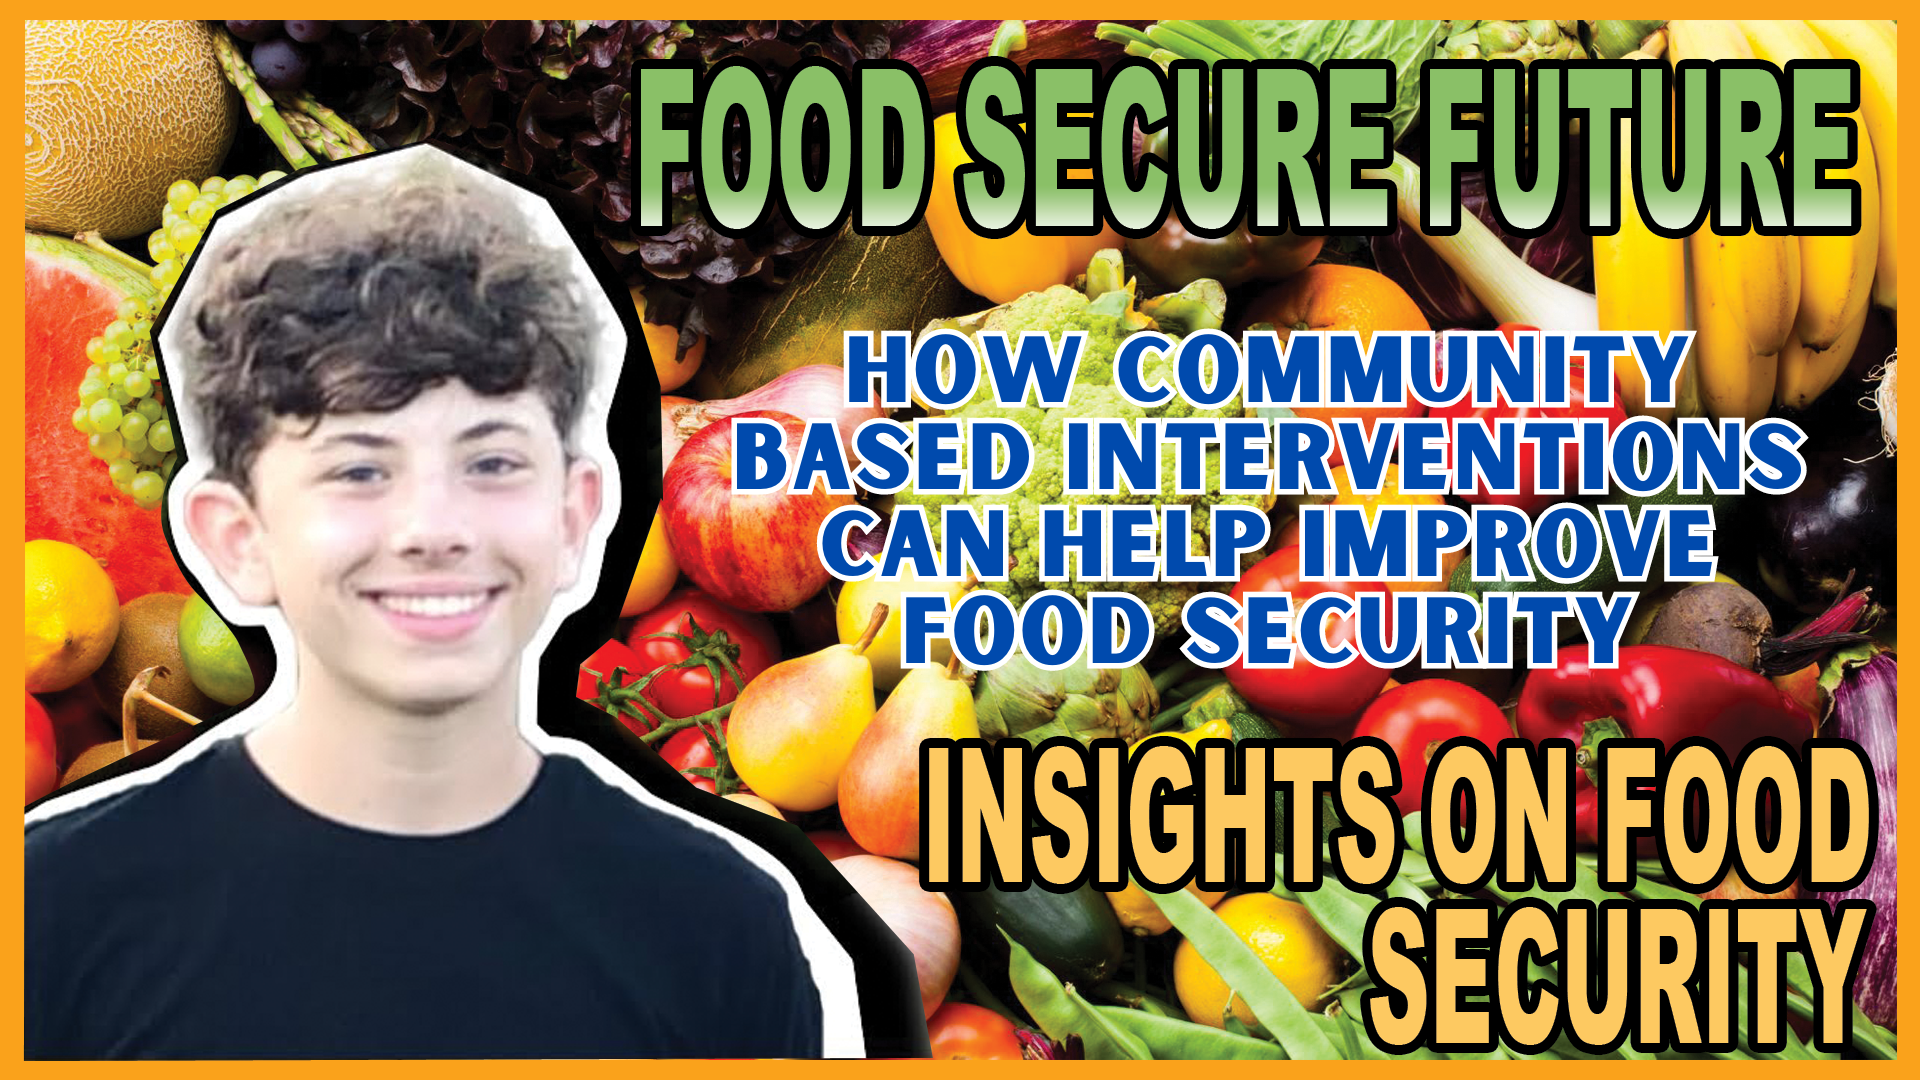 Image of Landon Agate from his blog Food Secure Future